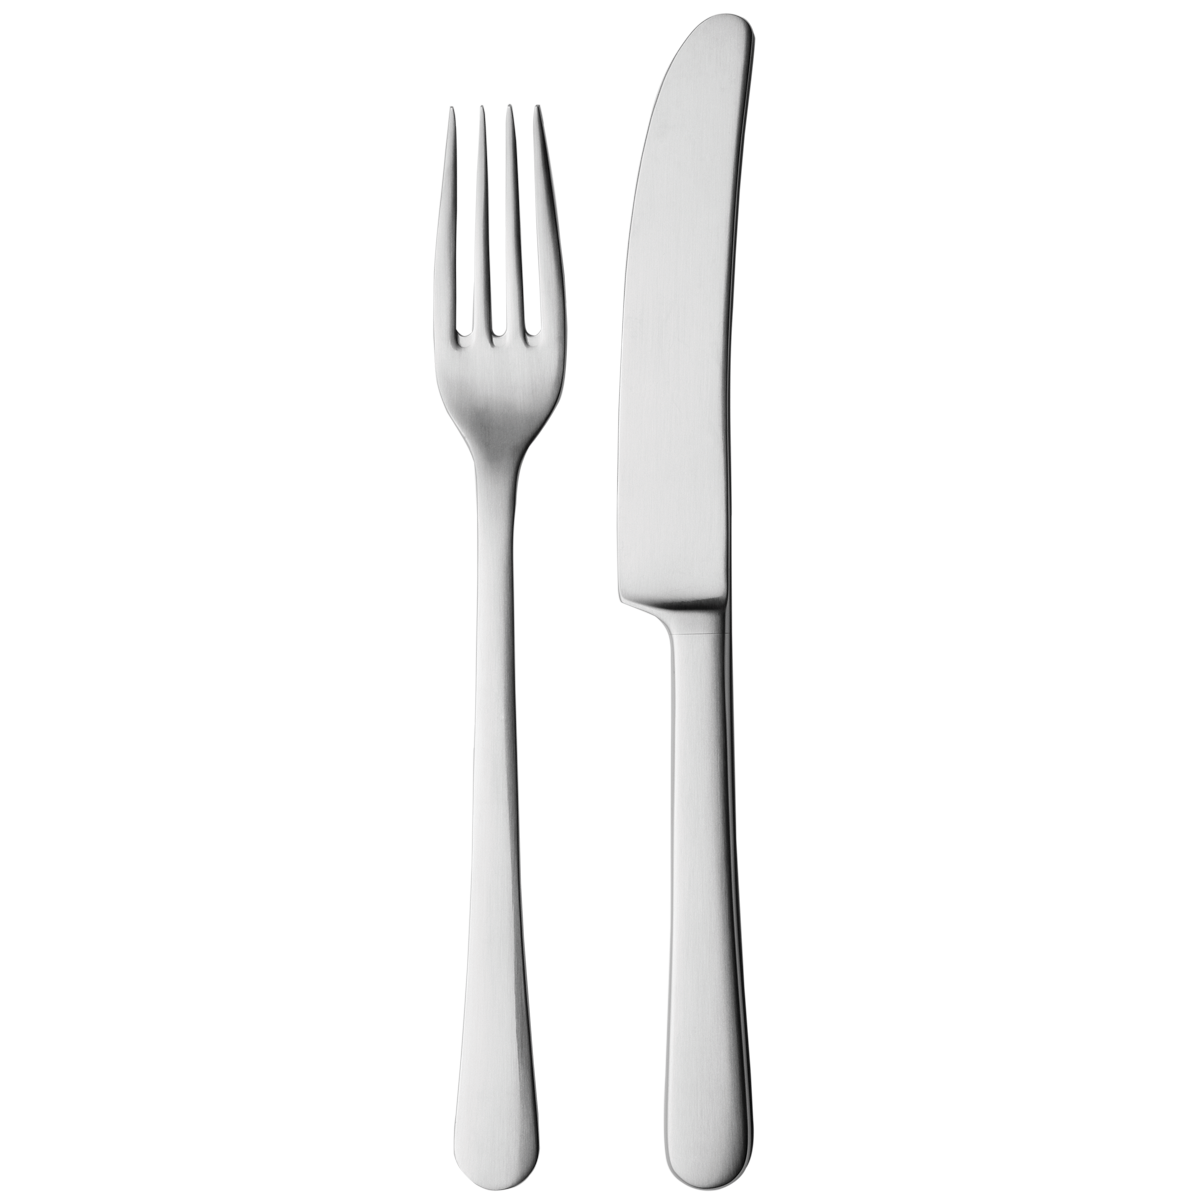 Fork And Knife Images - Clipart library